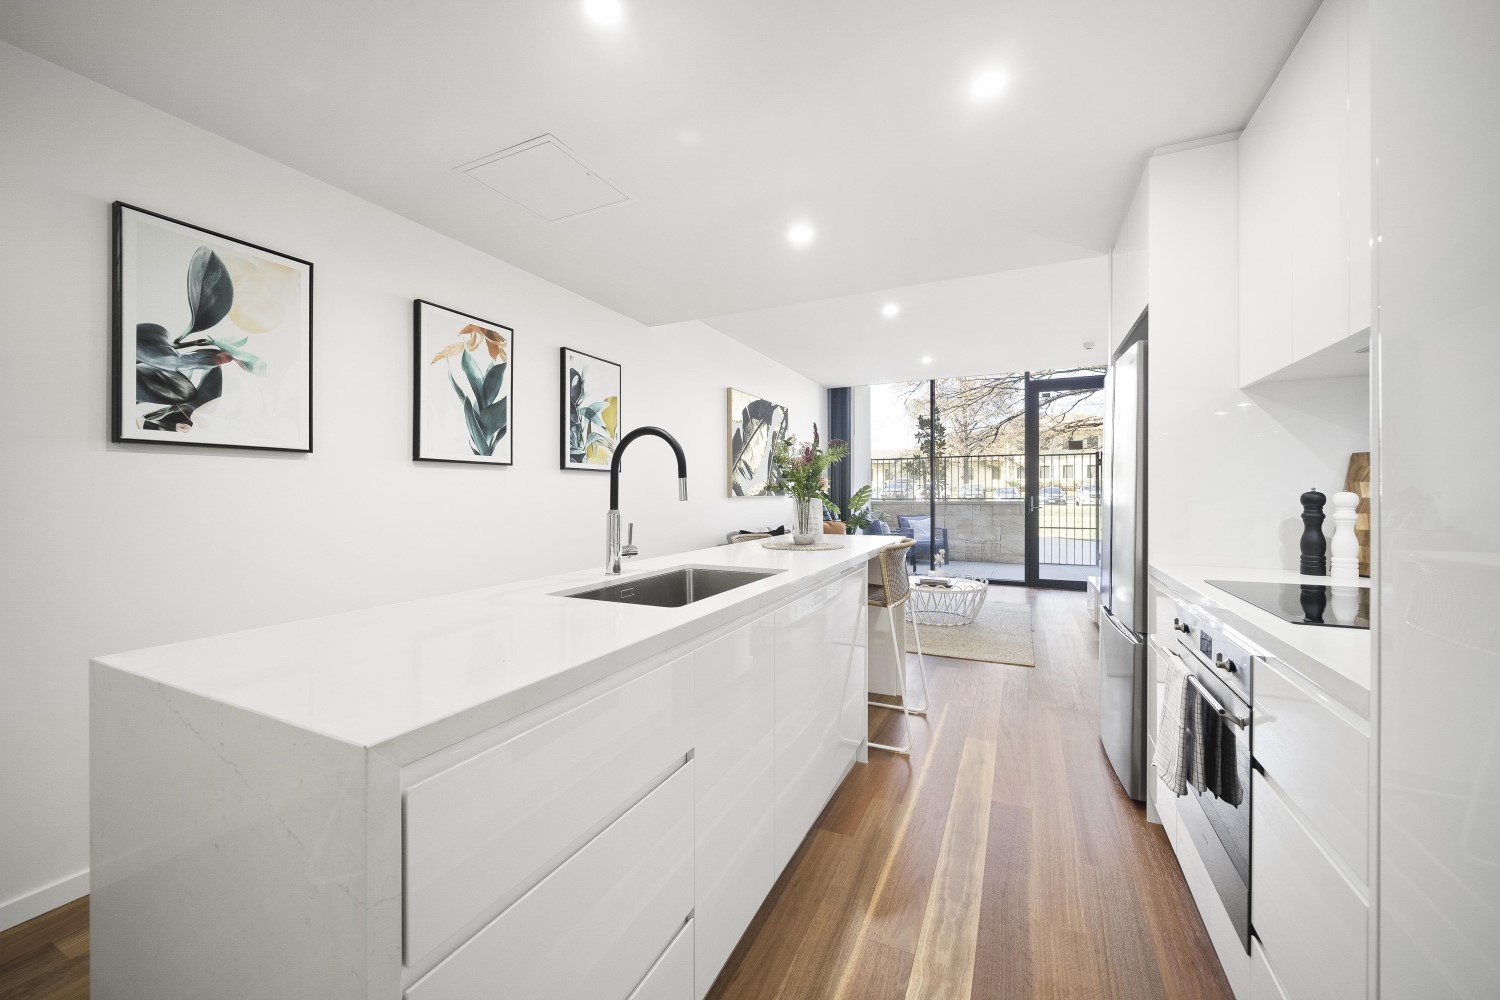 Kitchen - One Bedroom Apartment - Founders Lane Apartments - Canberra - Urban Rest